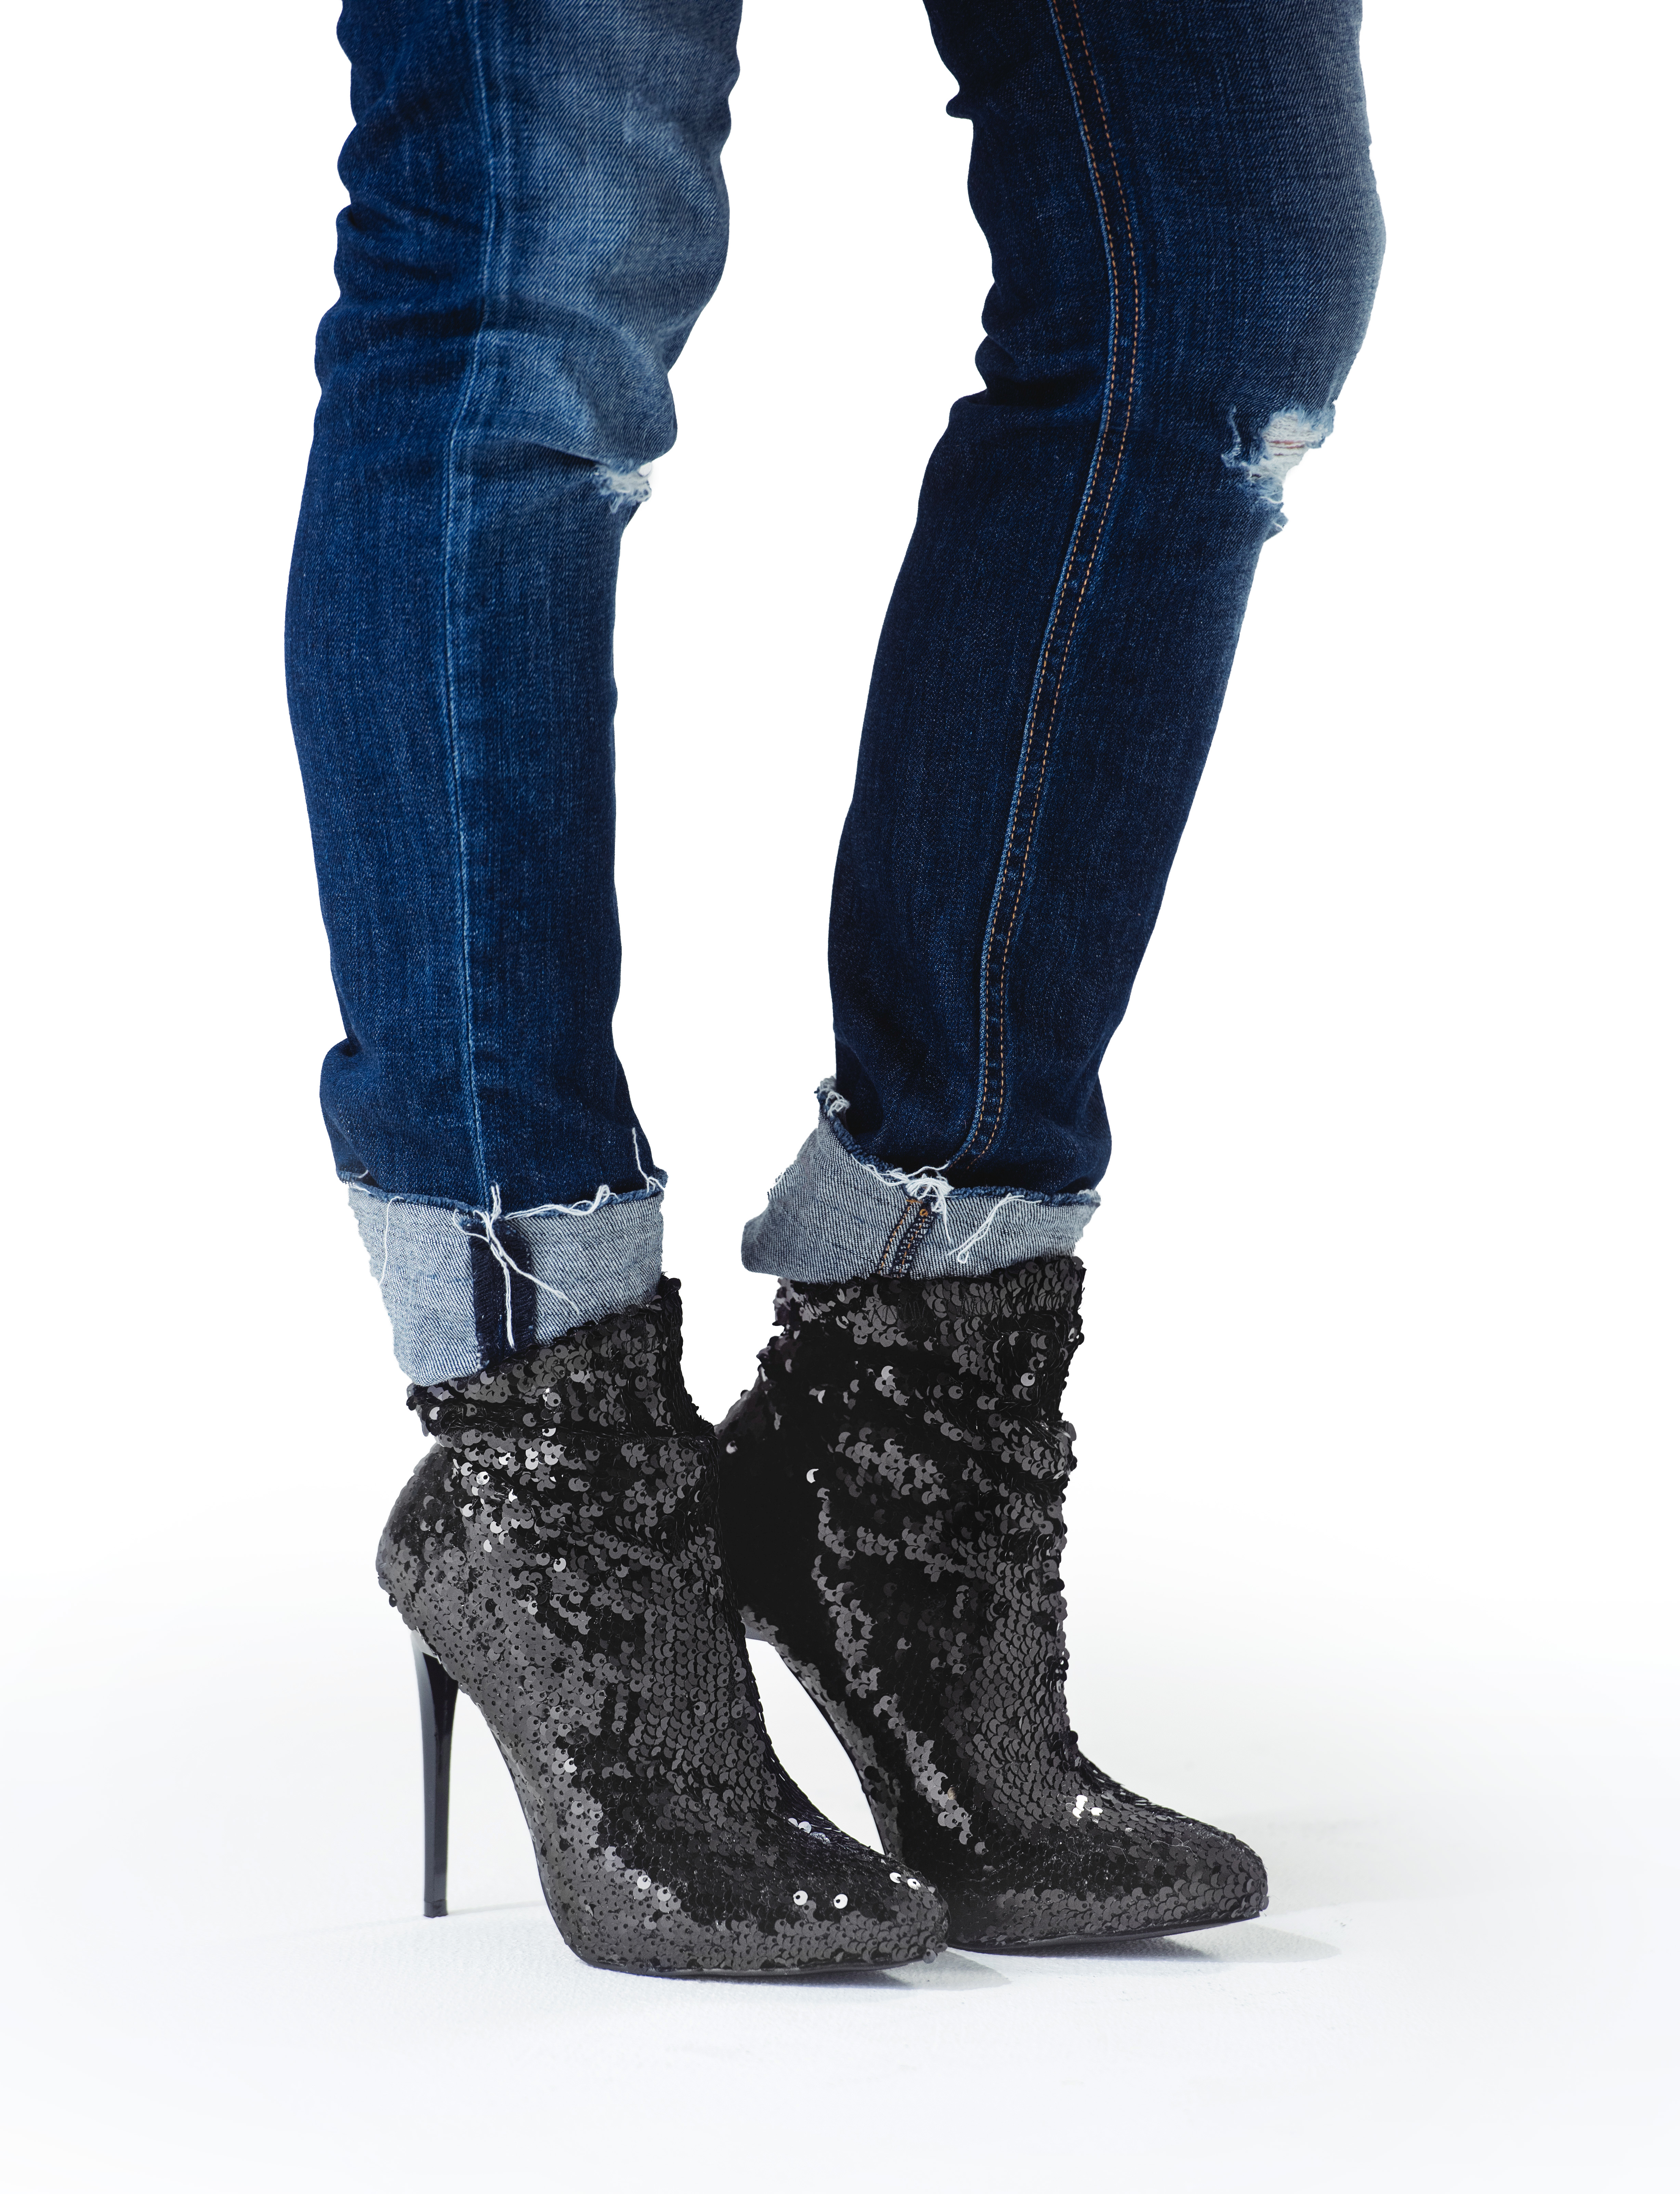 Glam up distressed denim with a wow factor sequined bootie